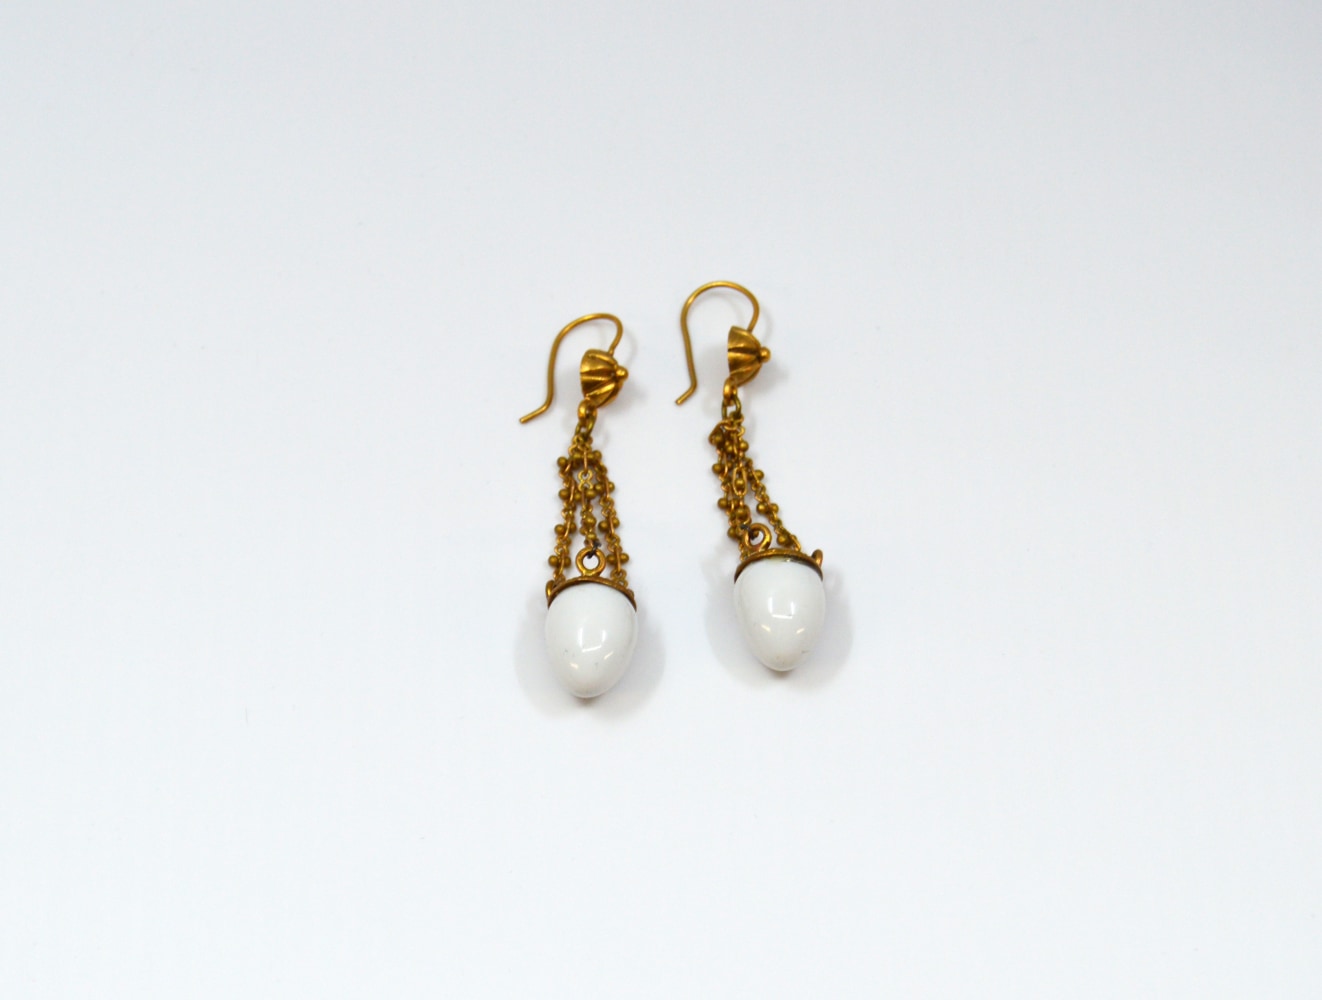 Amanda Kaiserman, Palace Earrings  one size  Brass With Gold Dip, Porcelain From Limoges